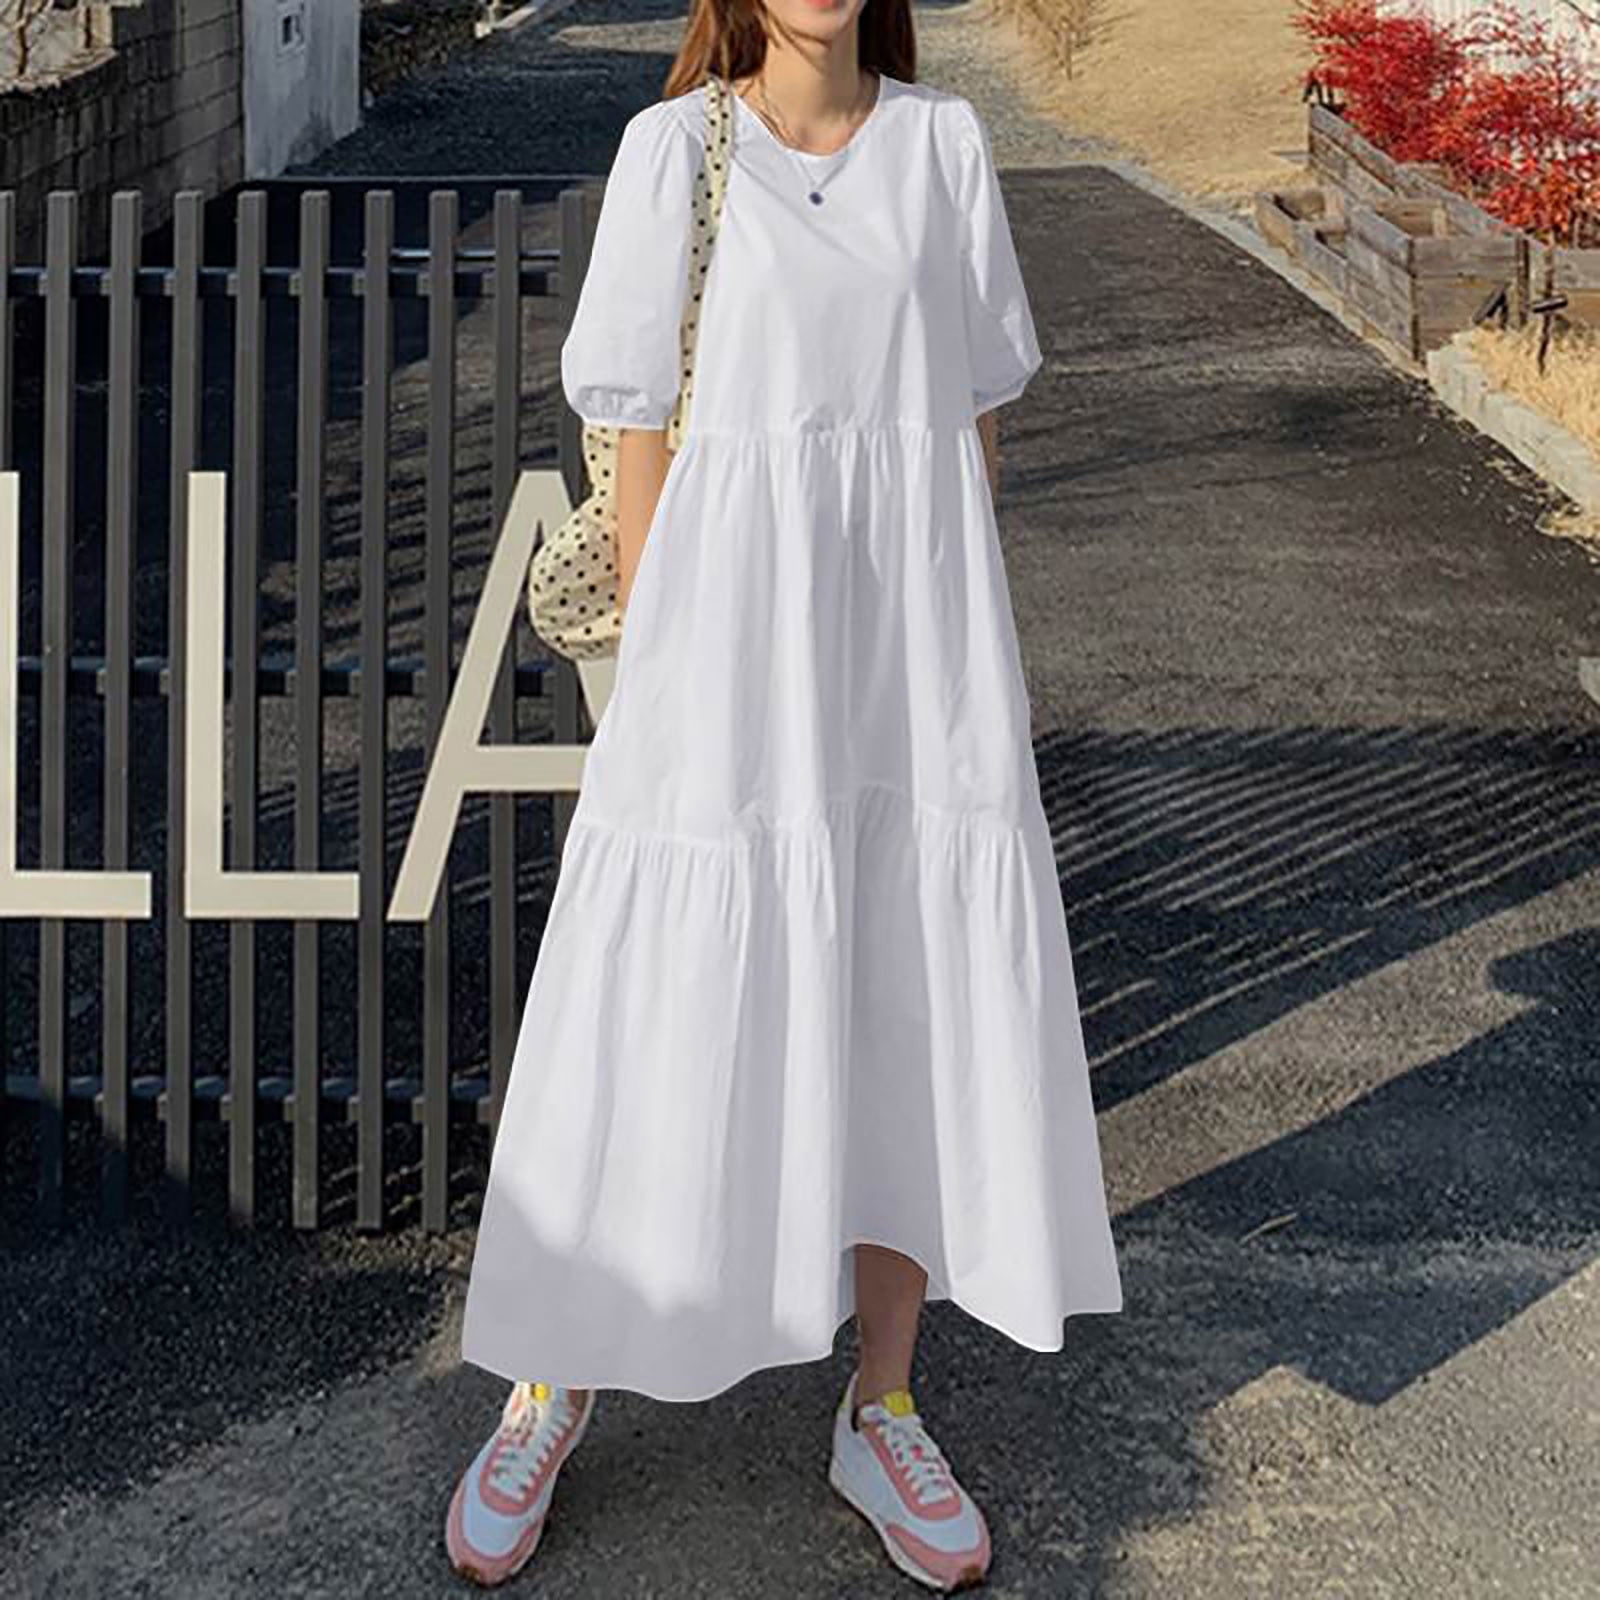 CTEEGC Womens Dresses Casual Loose Solid Color Cotton Linen